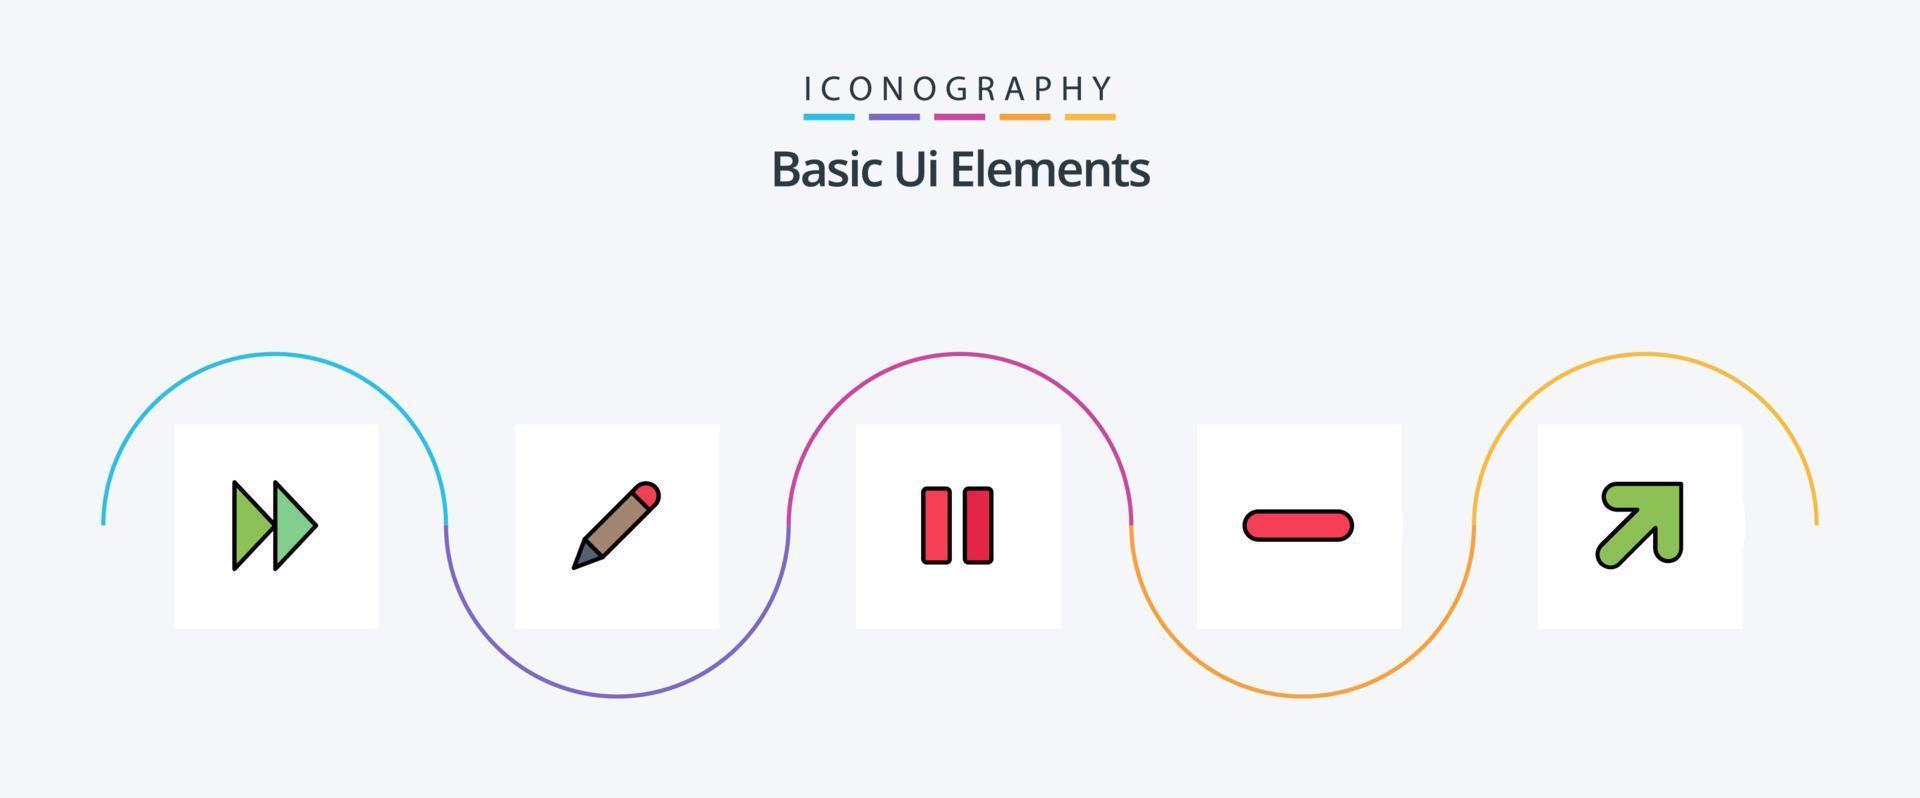 Basic Ui Elements Line Filled Flat 5 Icon Pack Including up. remove. control. minus. delete vector